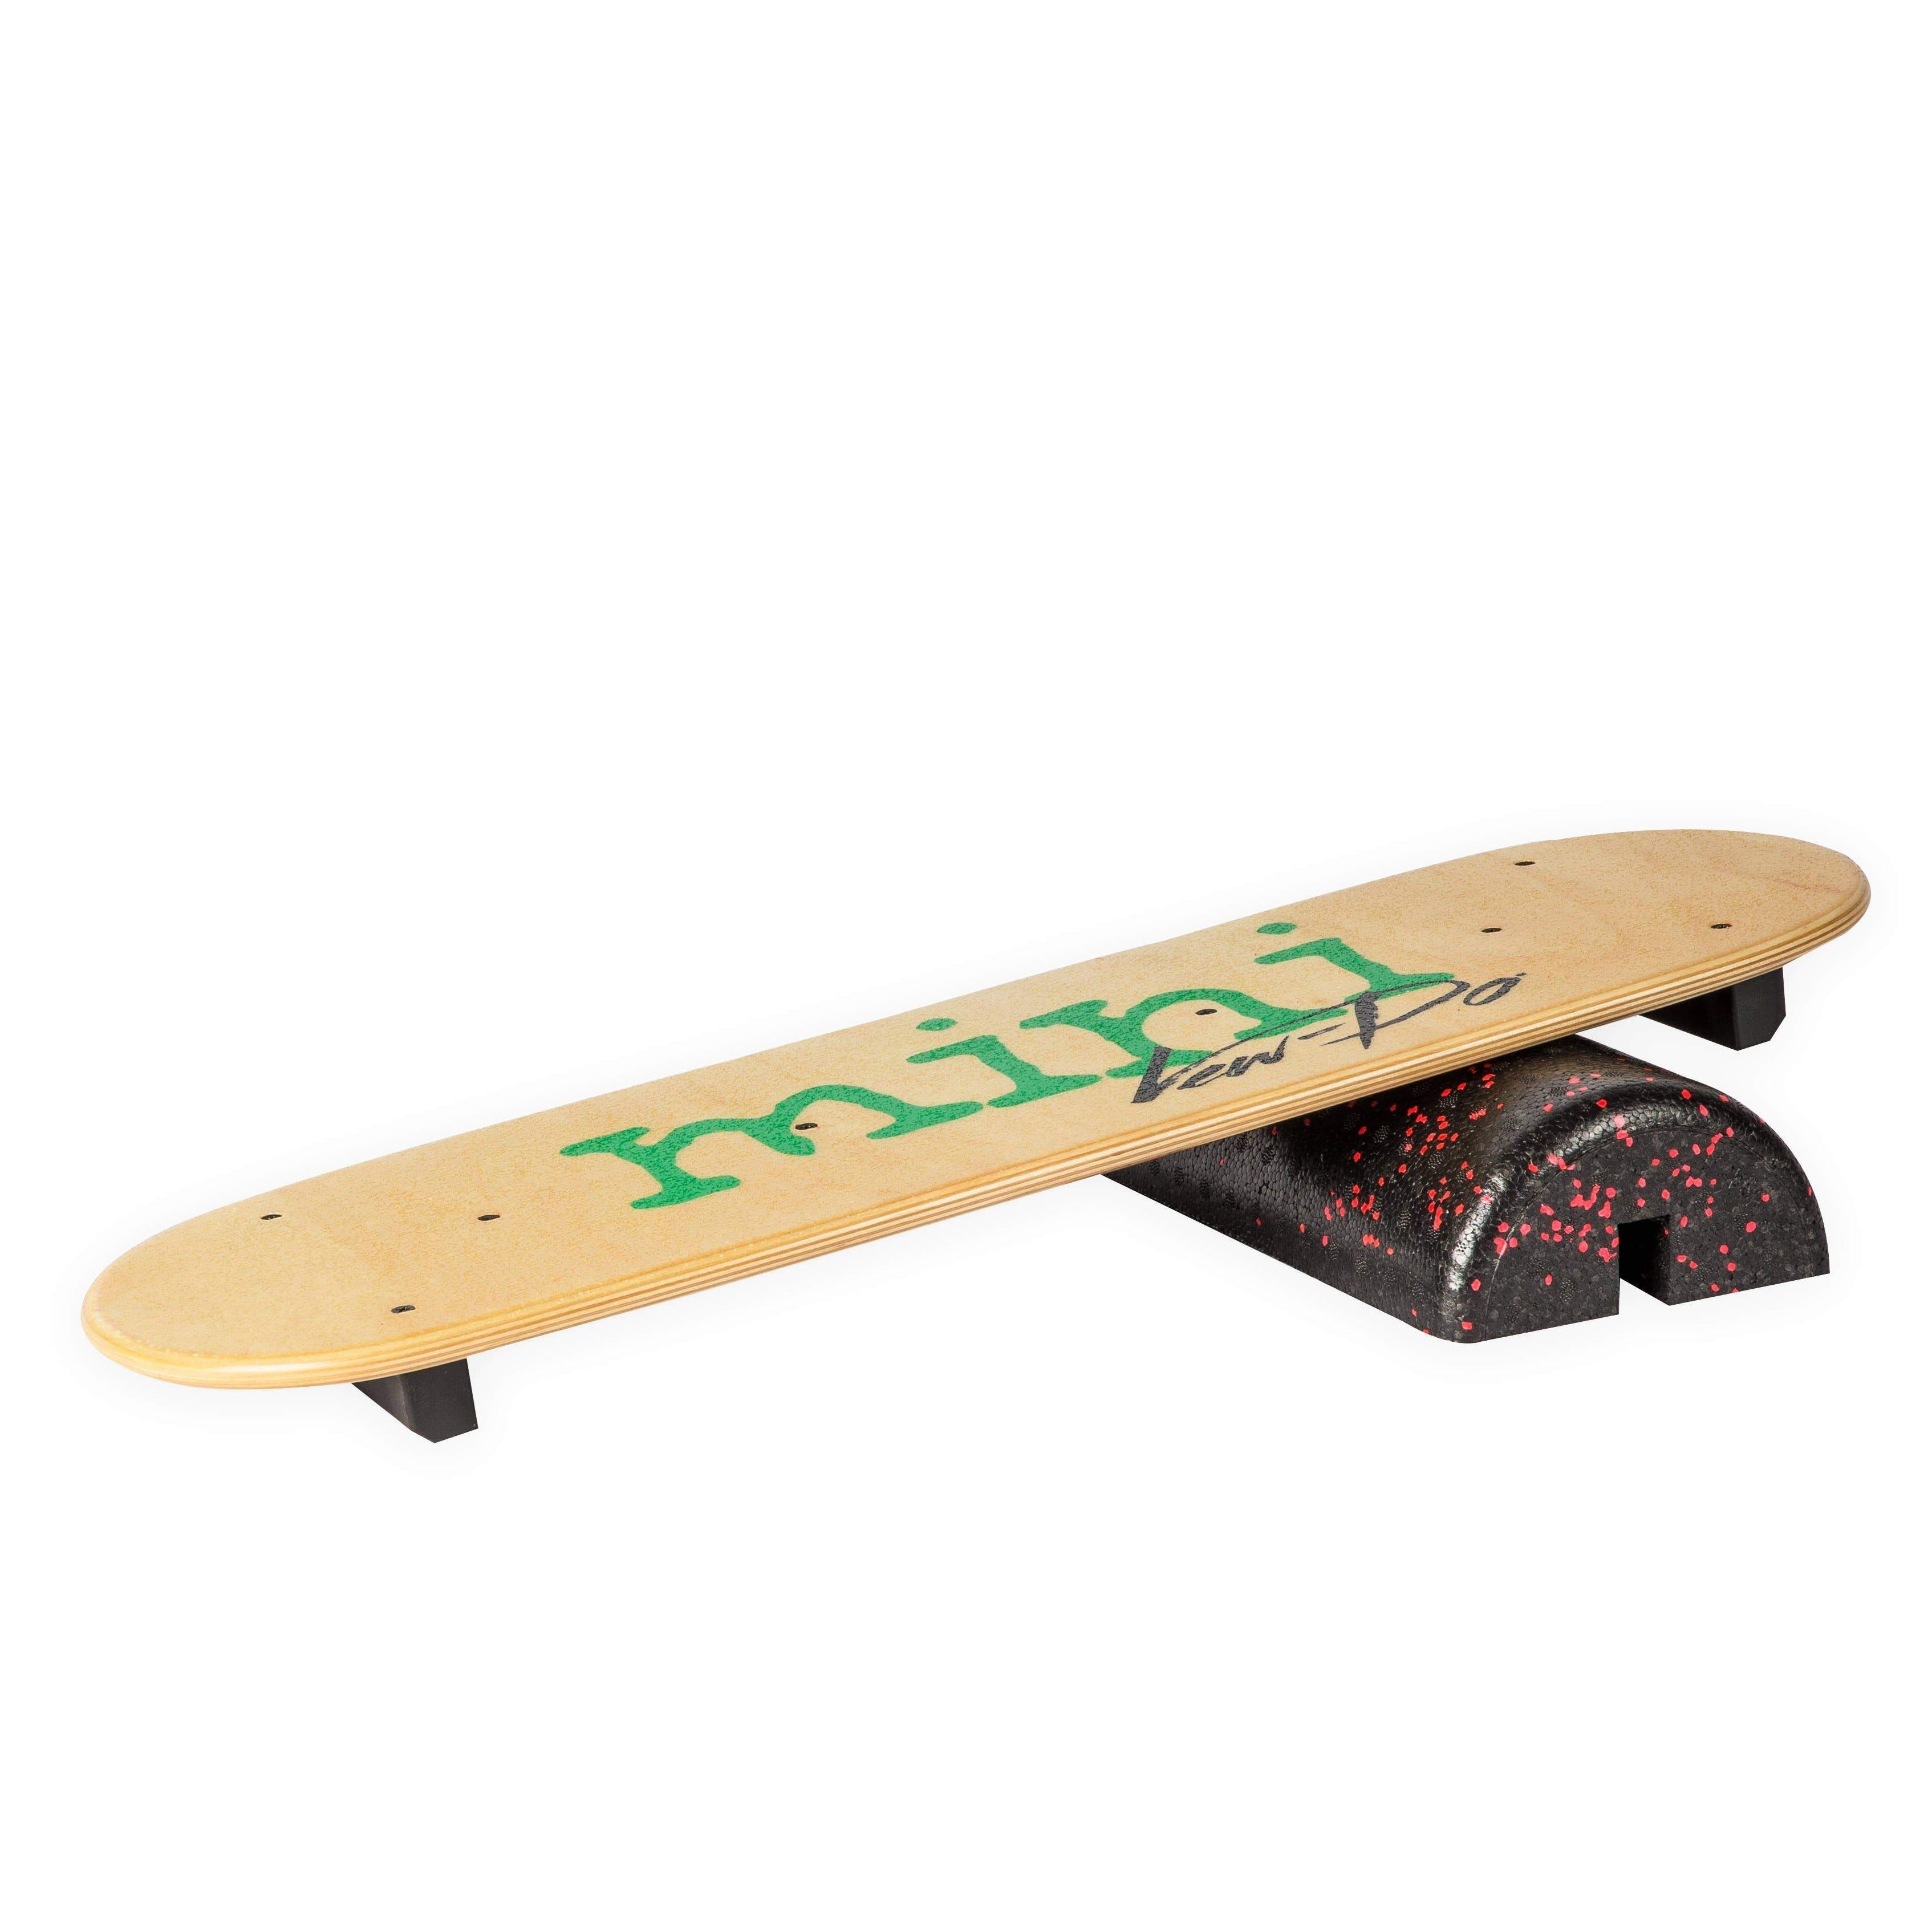 Vew-Dew Boards | Mini Balance Board Trainer With Foam Teeter, Balance Boards, Vew-Do Boards, Defiance Outdoor Gear Co.